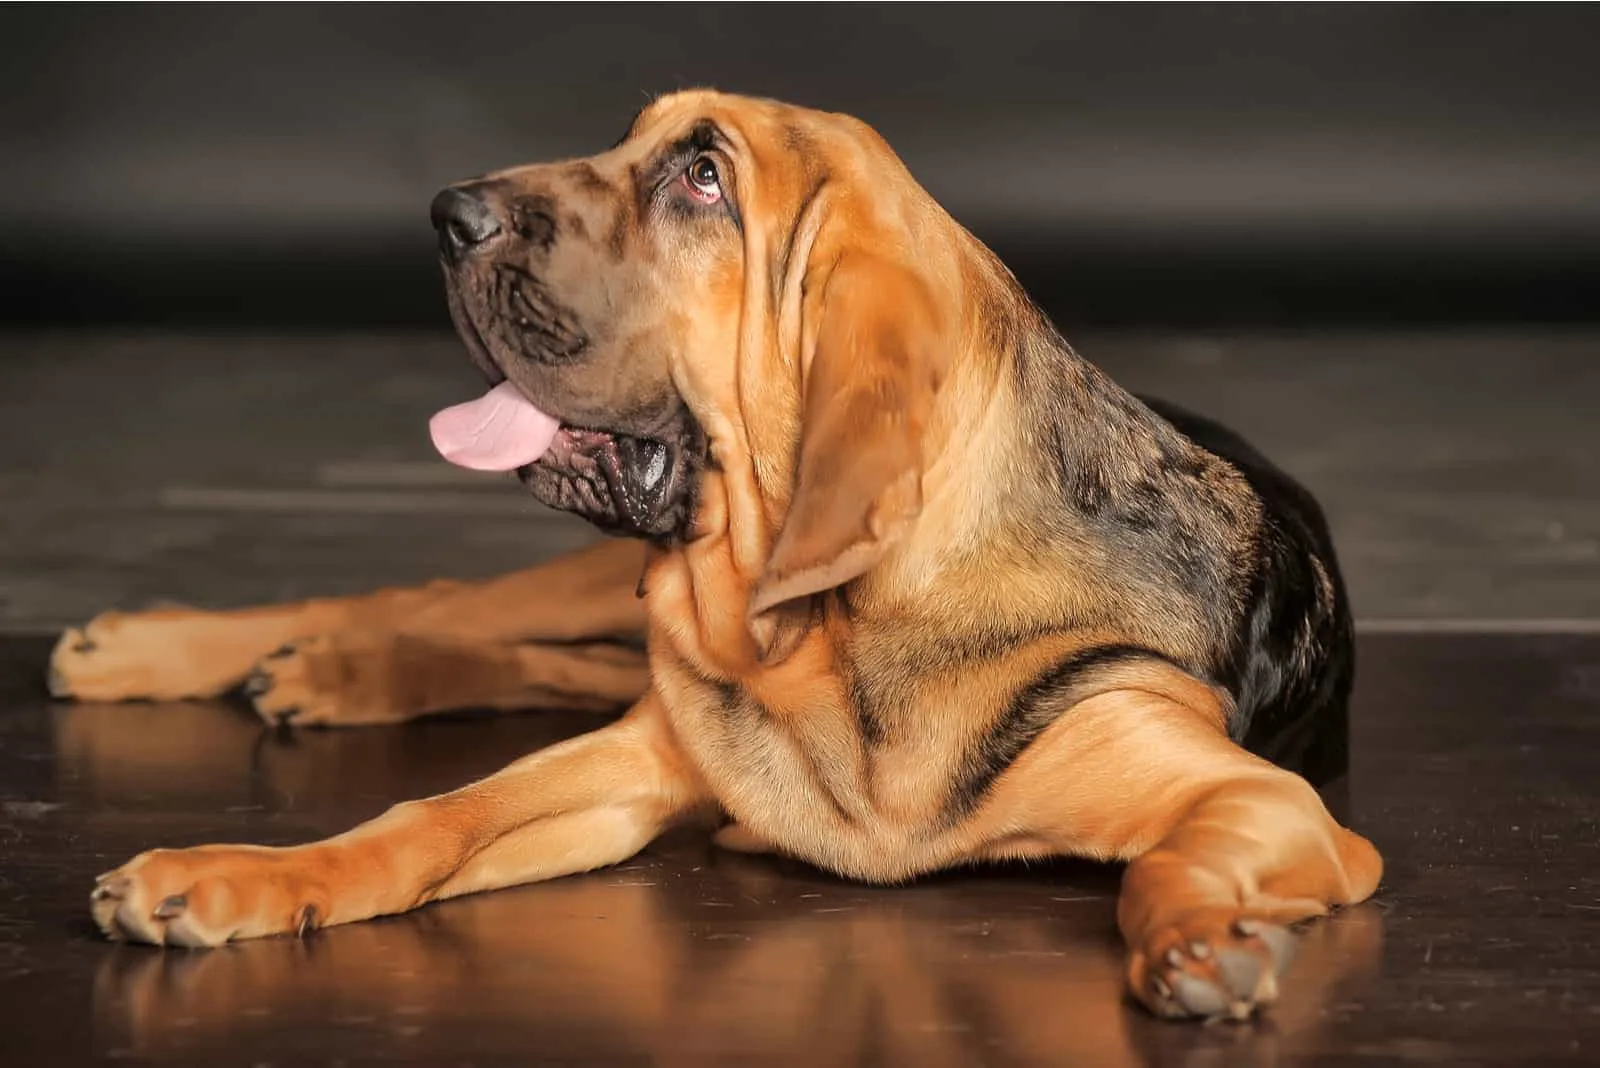 Bloodhounds lie on the floor and look away